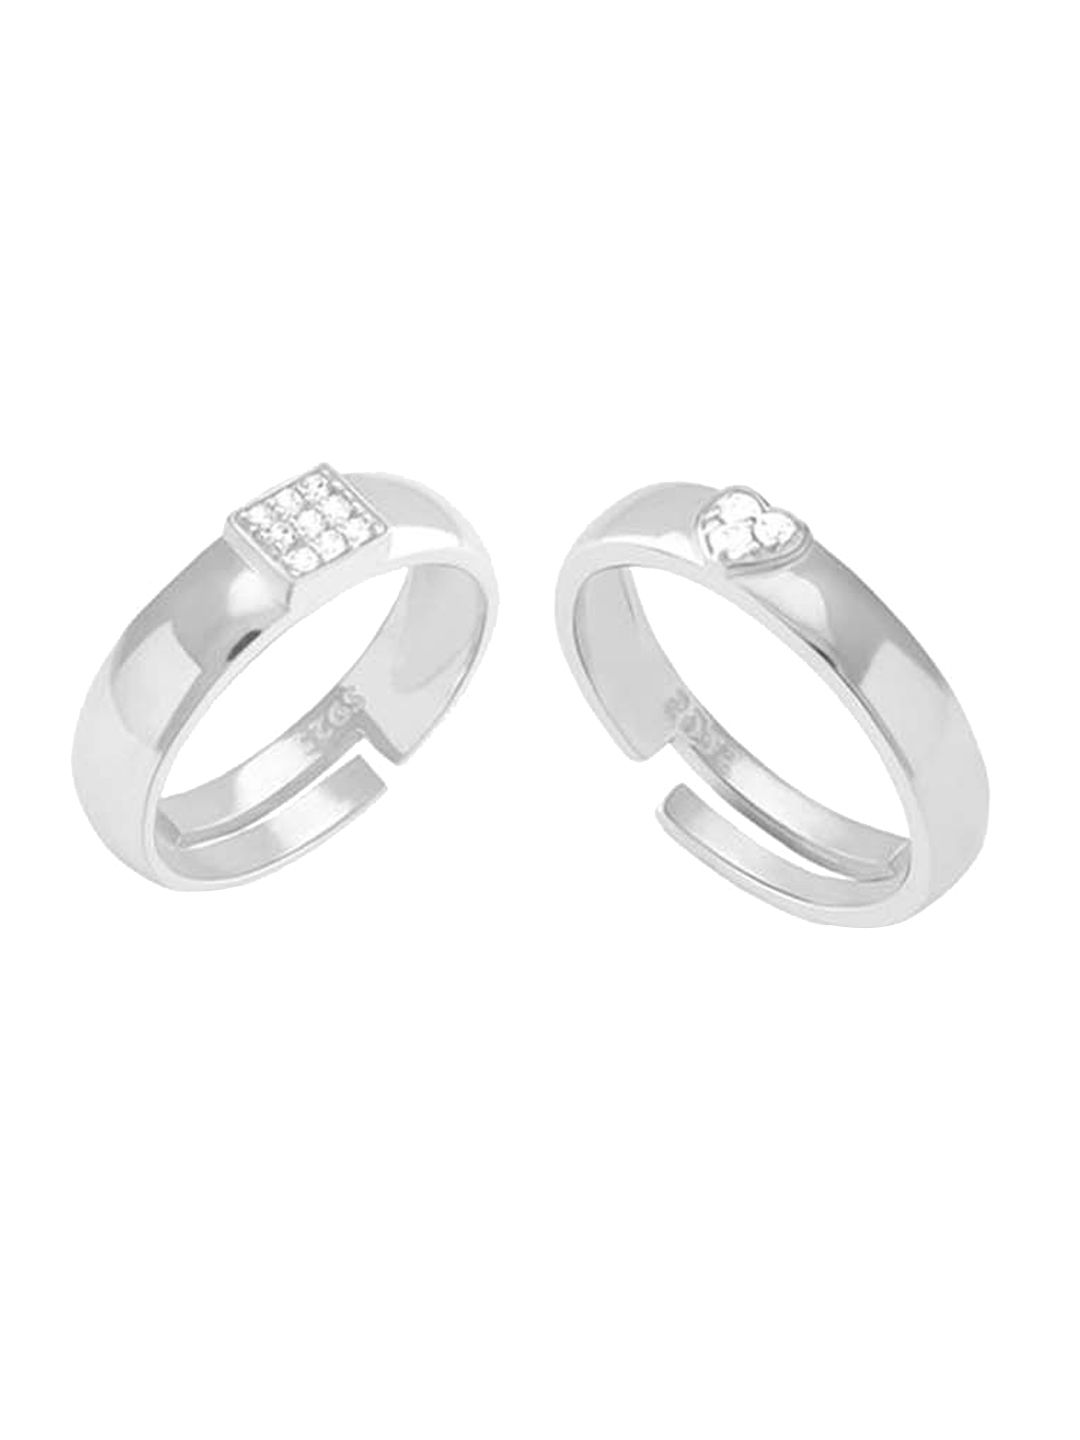 GIVA Set Of 2 Rhodium-Plated & White Cubic Zirconia-Studded Couples Adjustable Finger Rings Price in India